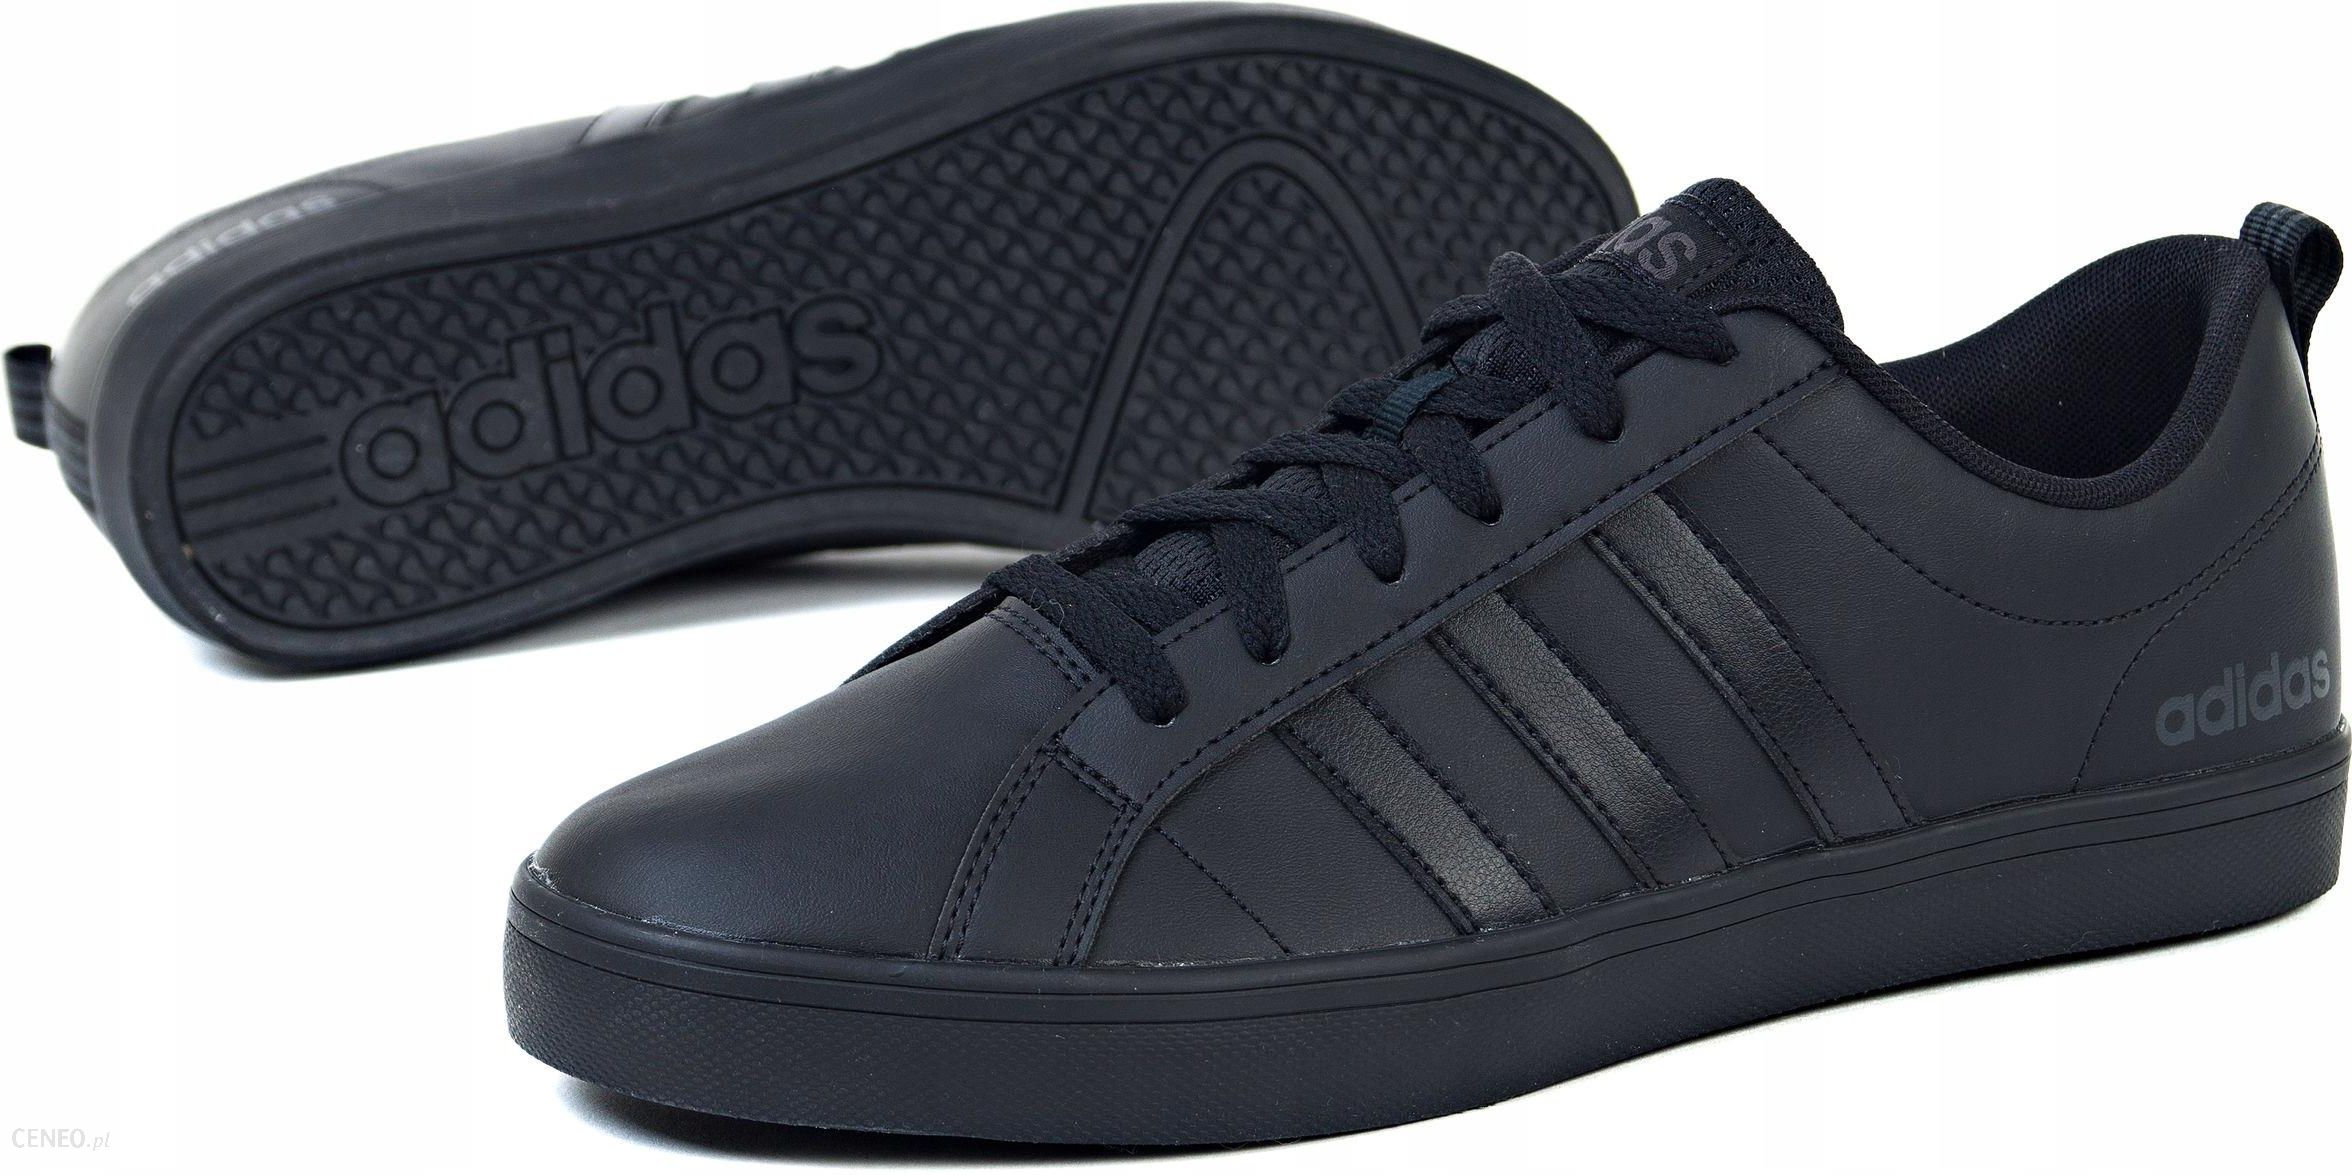 adidas NEO Pace VS Mens Black Trainers Lace Up Basketball Sports Shoes ...